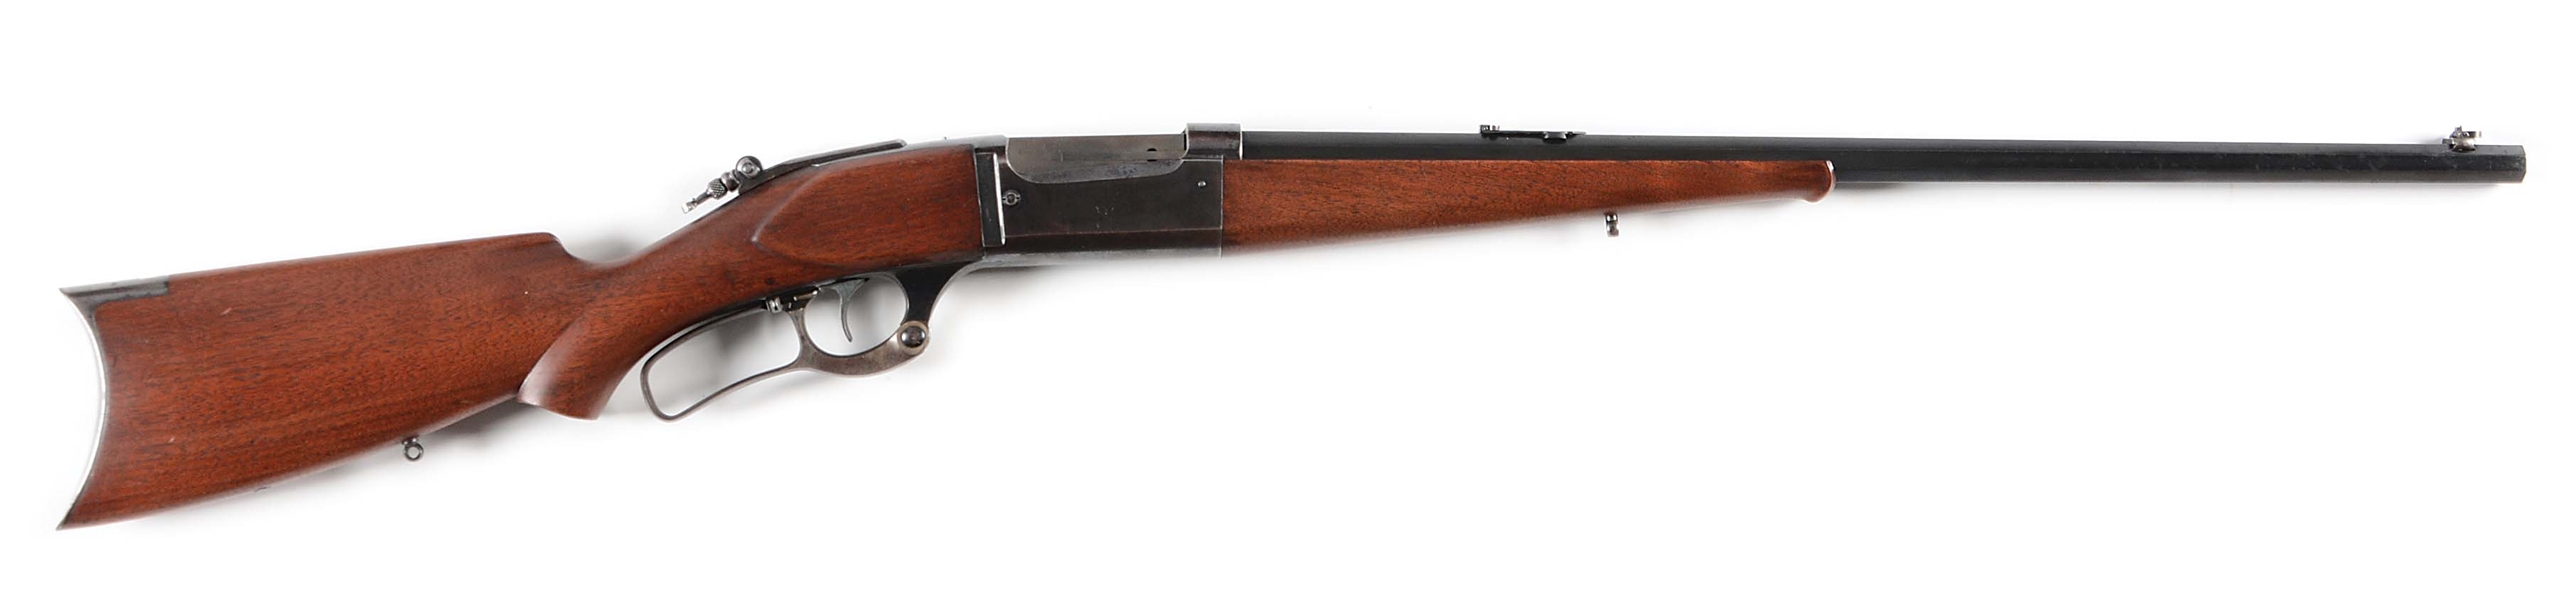 (C) SCARCE HIGH CONDITION SAVAGE MODEL 1899 SEMI-DELUXE LEVER ACTION RIFLE (1911).